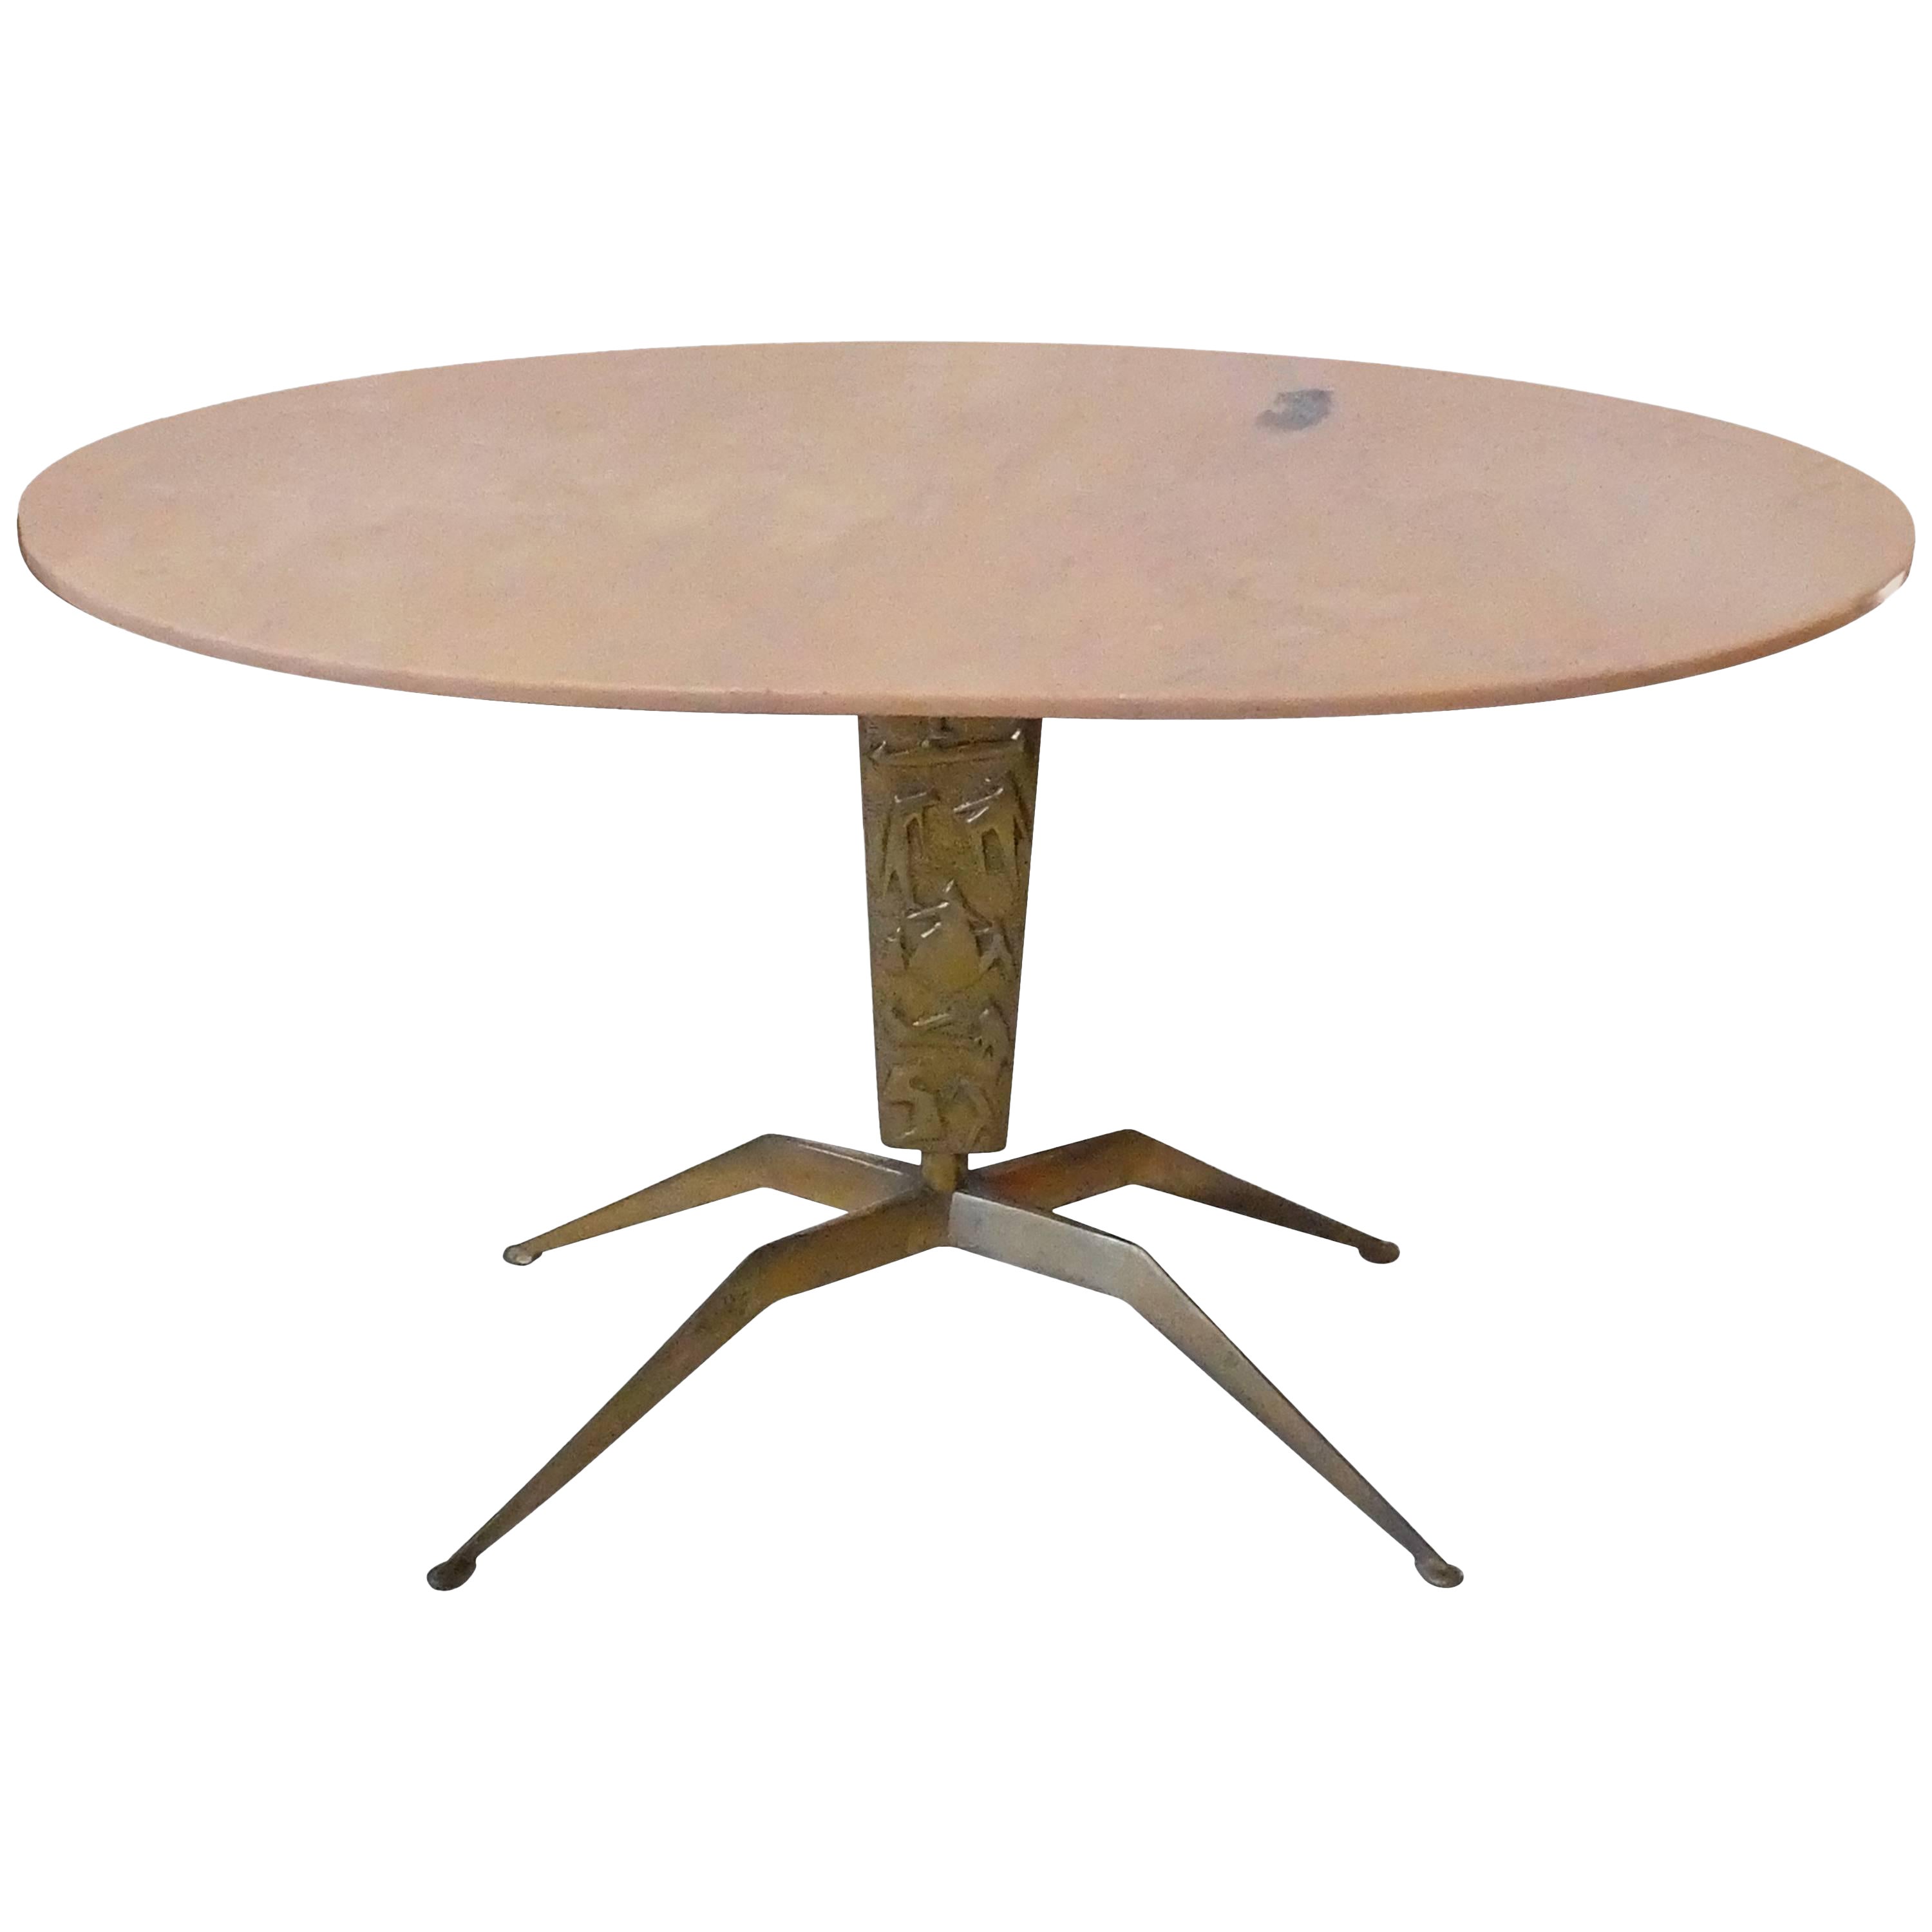 Italian Mid-Century Modern, Oval Marble and Brass Side Table from the 1940s